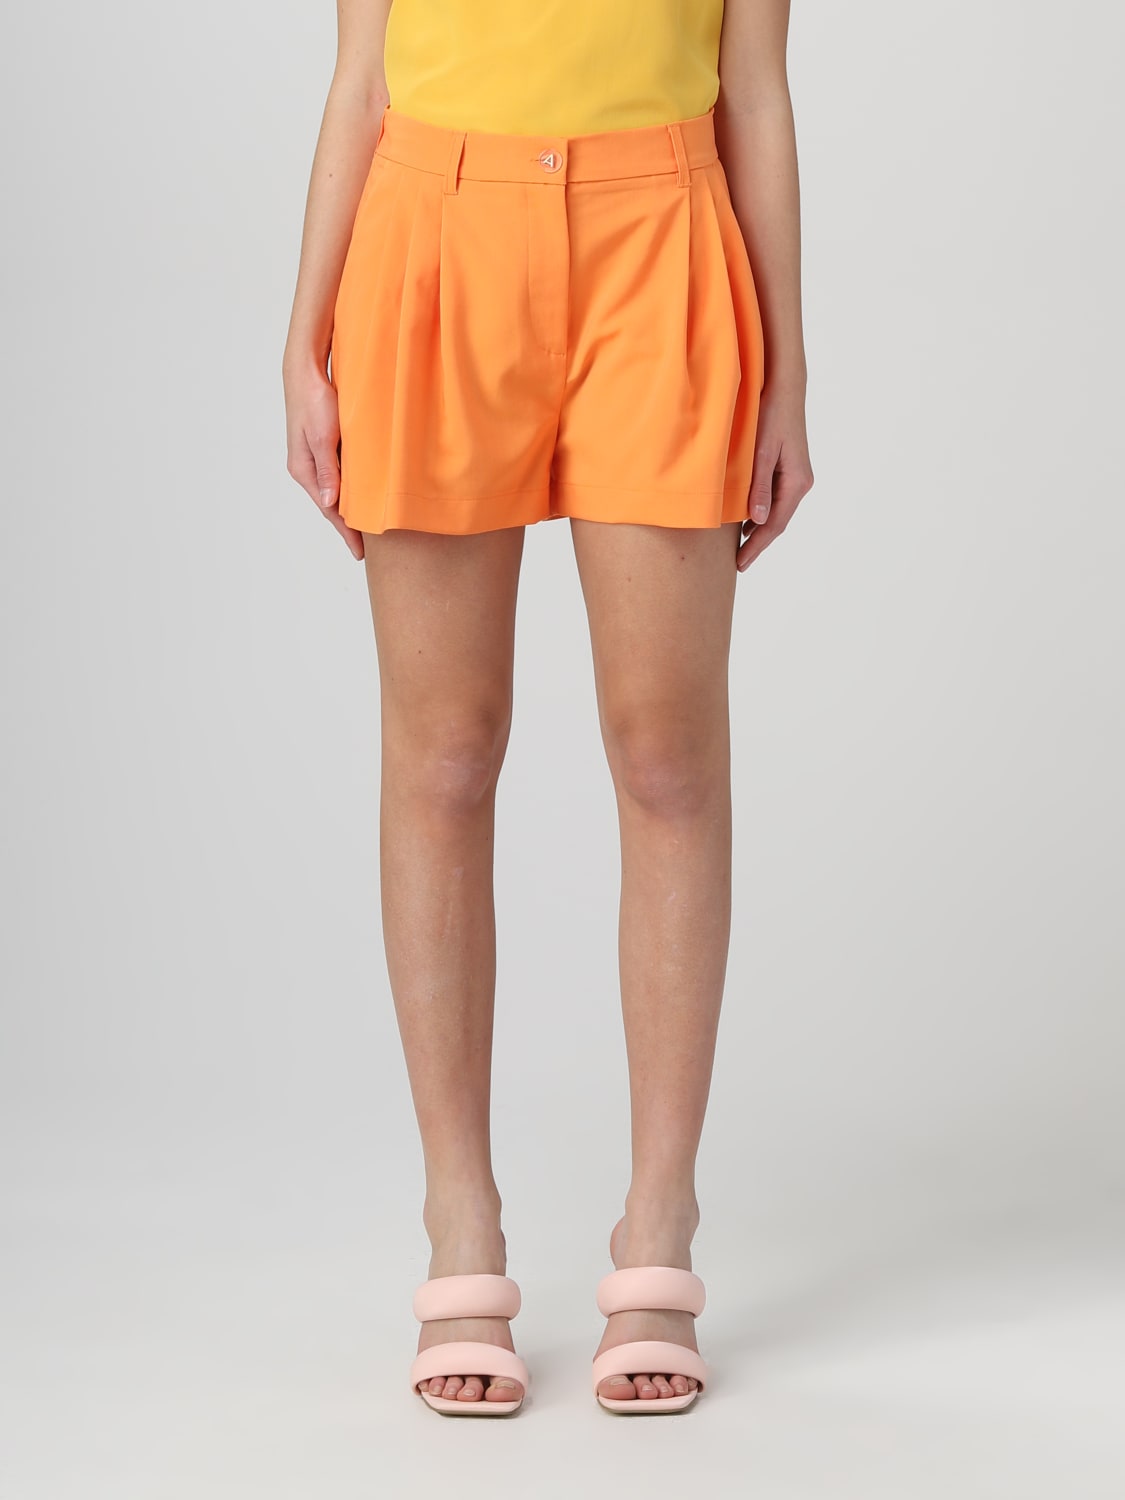 Actitude Twinset - Short woman Twinset - Actitude